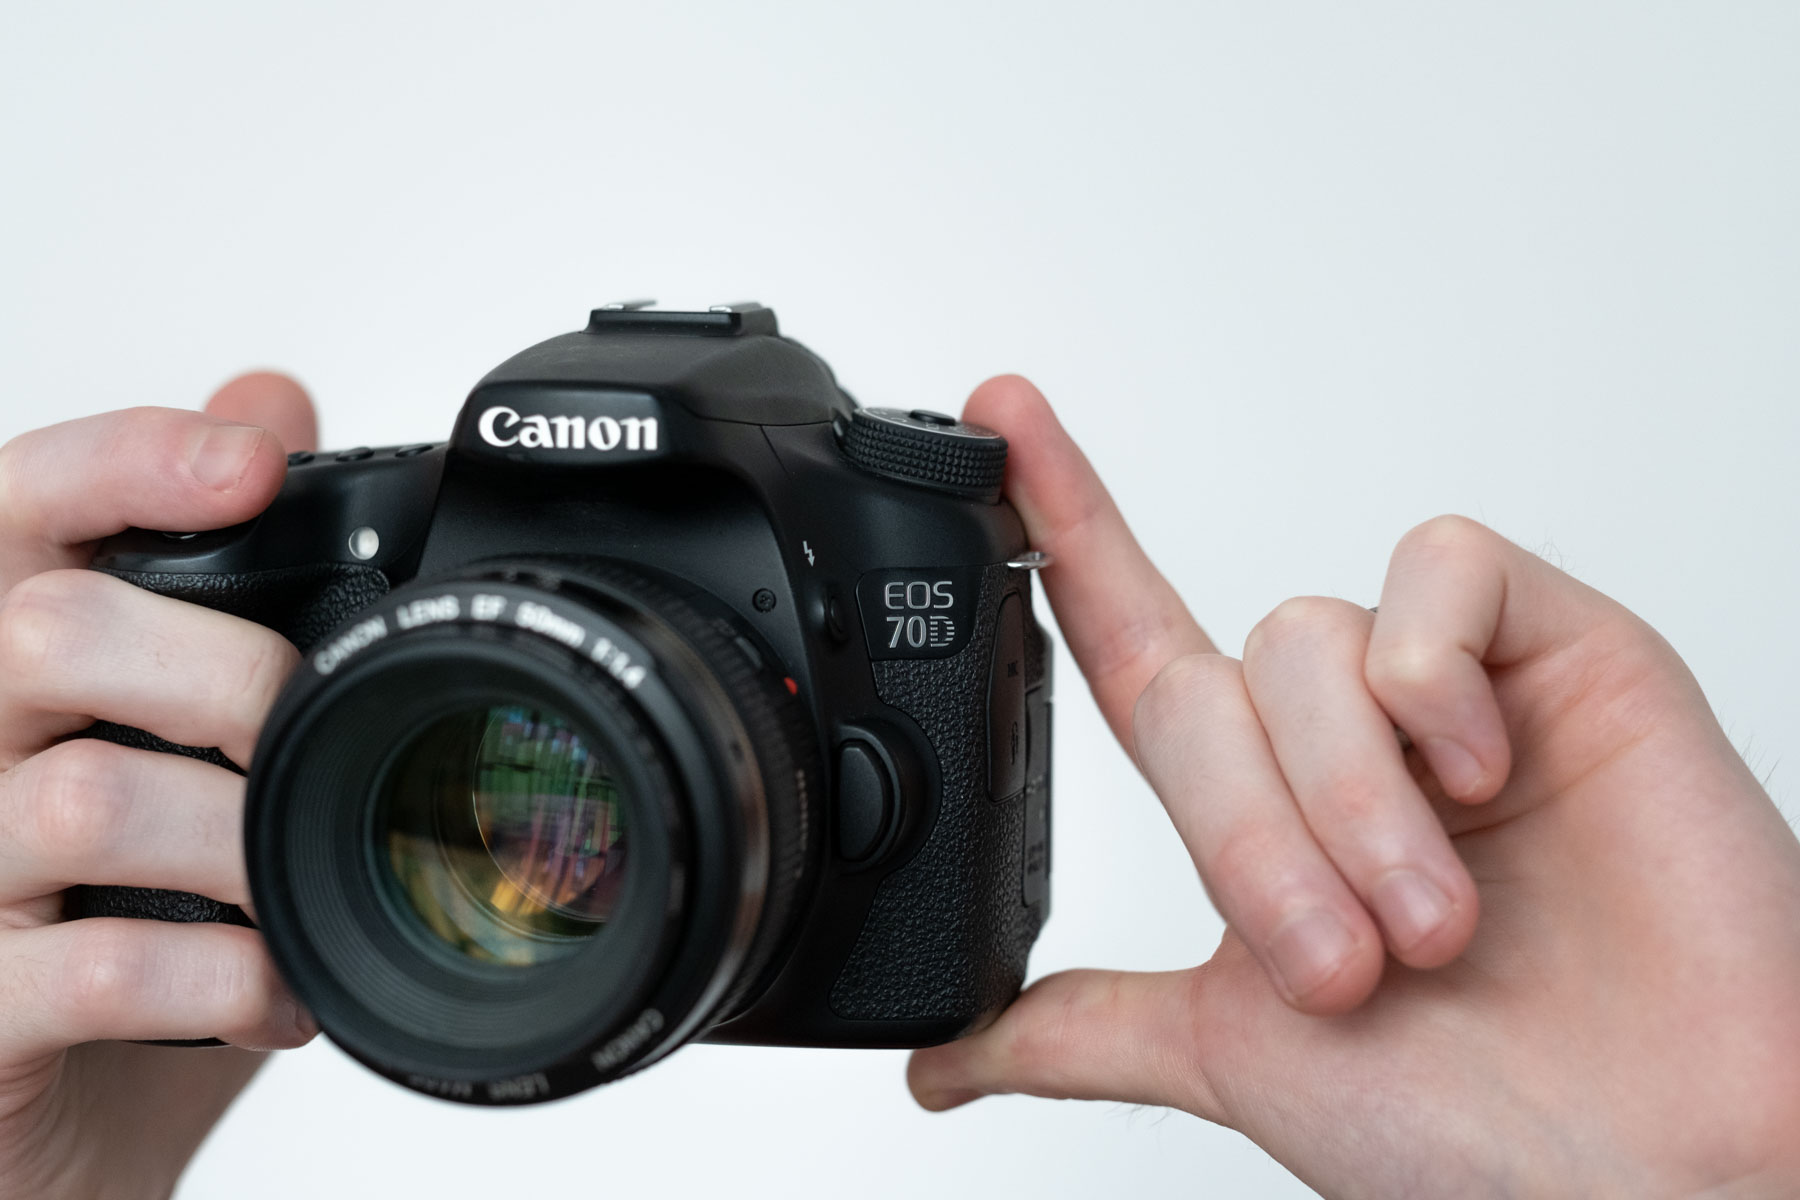 Canon 70D camera with 50mm 1.4 lens attached